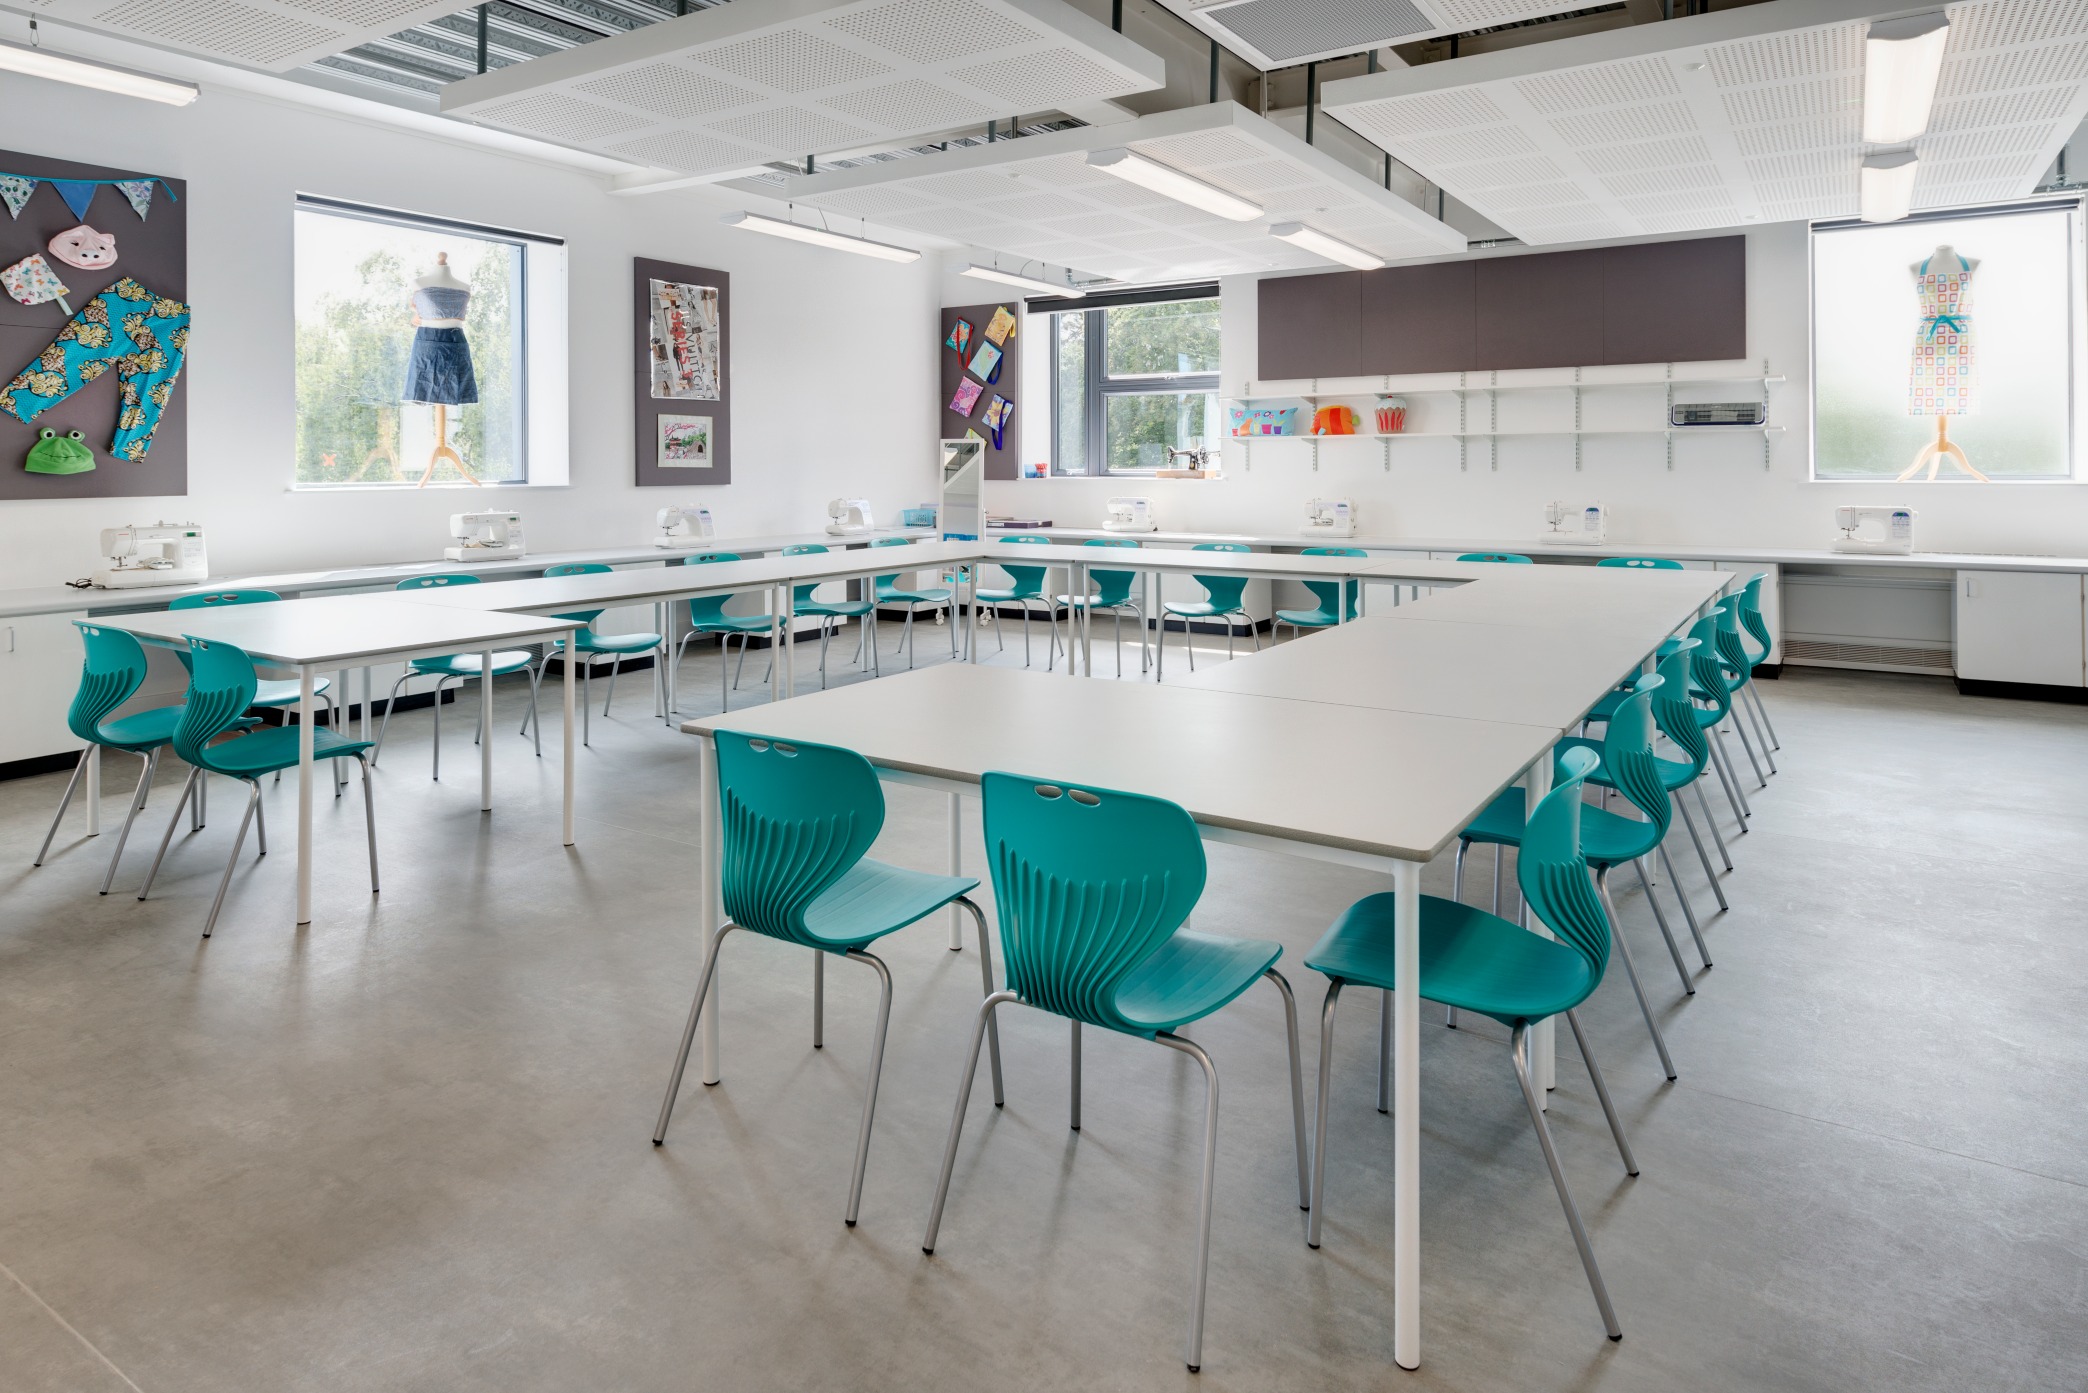 Selecting the Correct Education Furniture | Westcountry Group